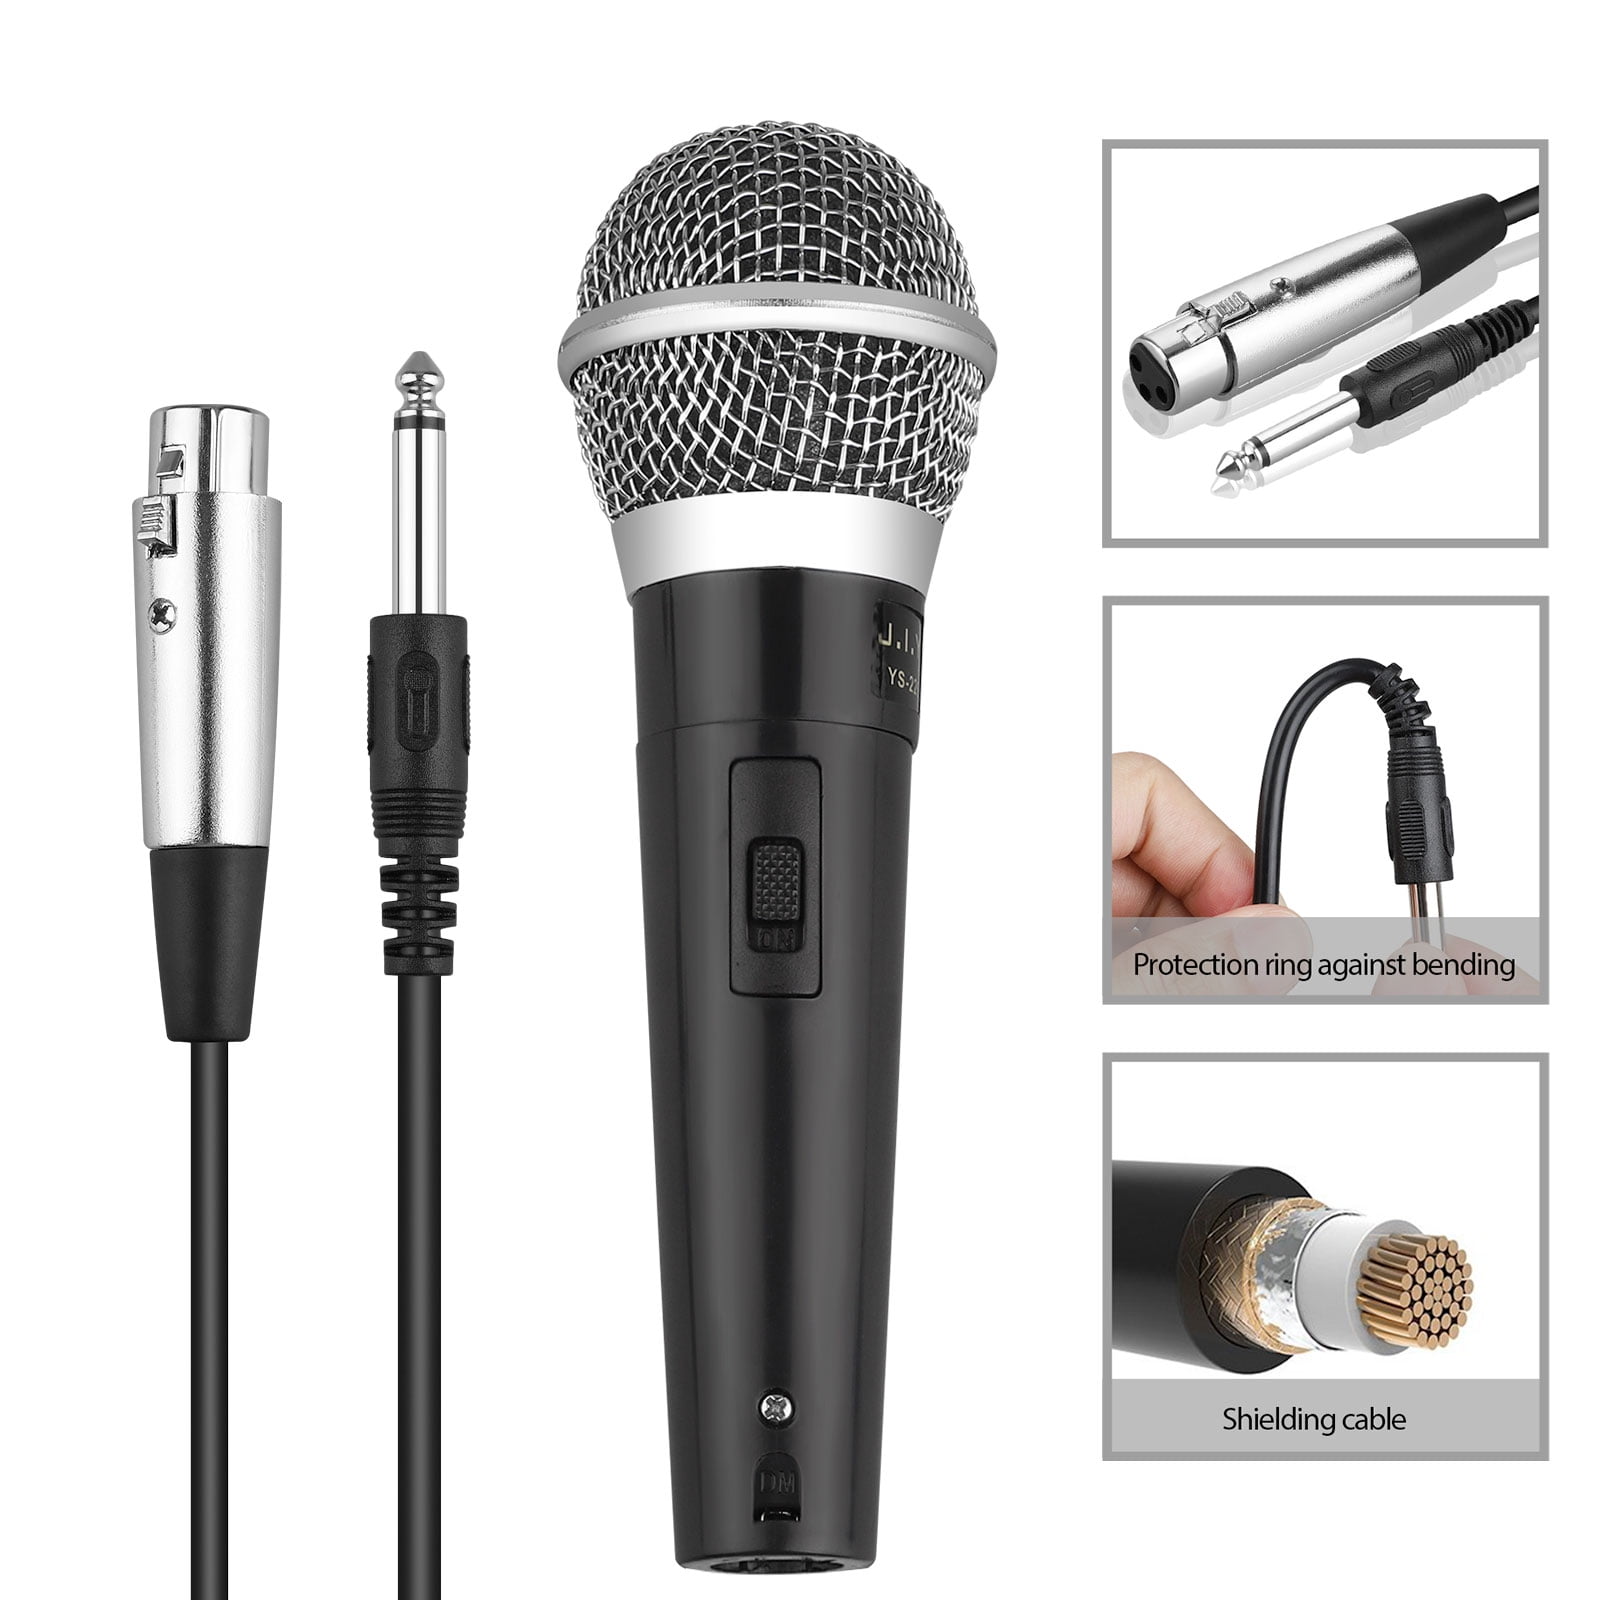 Pink Yuhoo Wired Microphone Wired Dynamic Microphone 3.5mm Jack Lightweight No Battery for Kids Singing Mechine Home Wired Microphone free size 